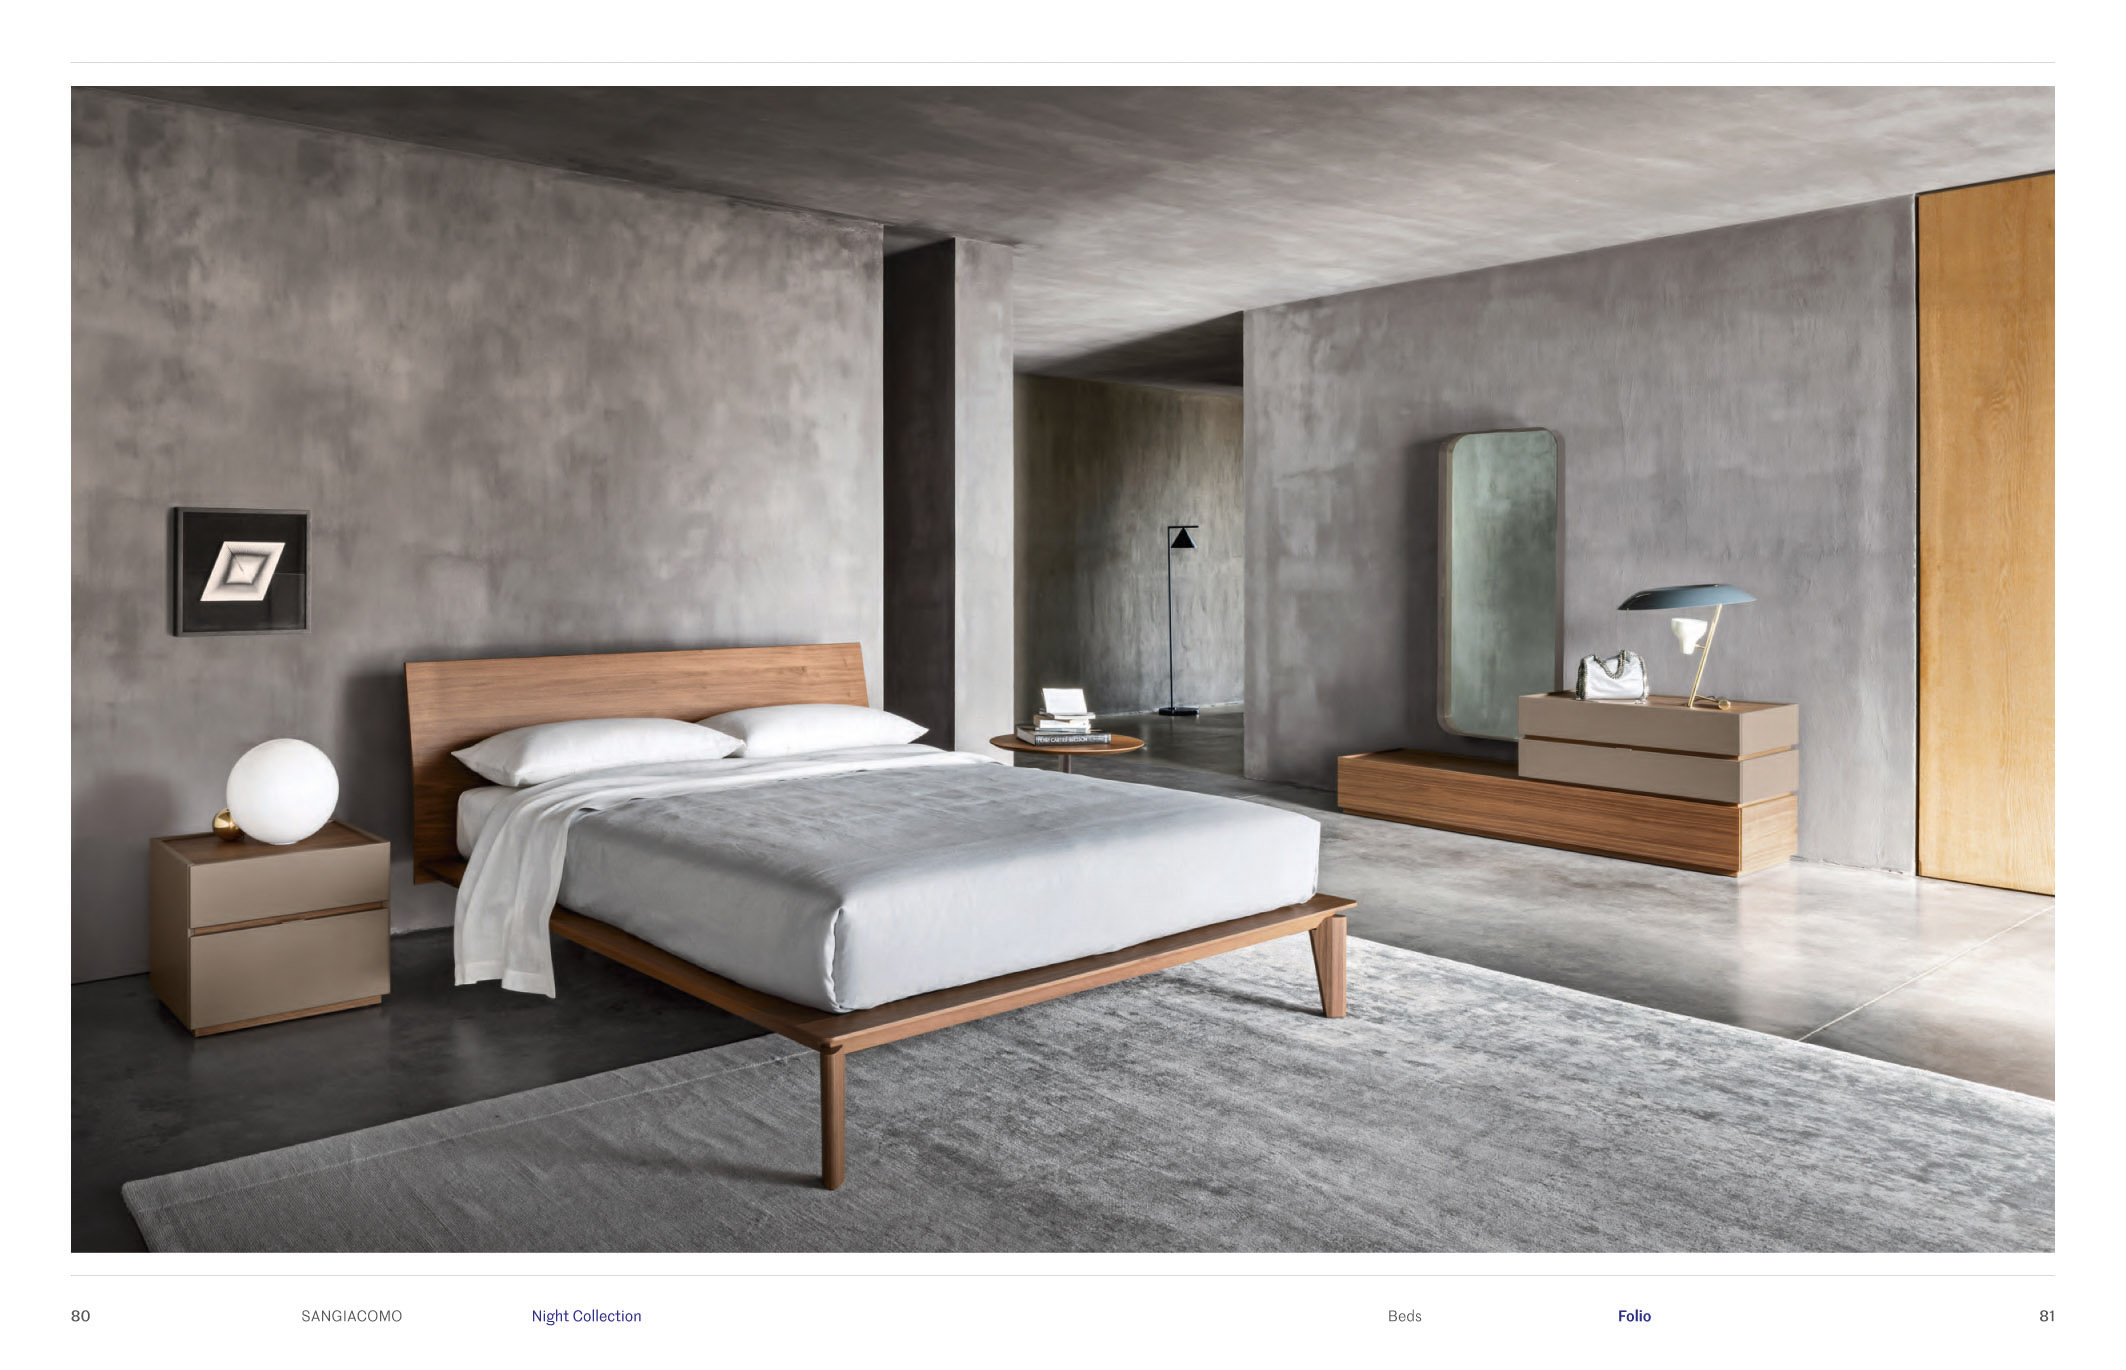 Accor hulp in de huishouding toilet Sangiacomo – Beds collection